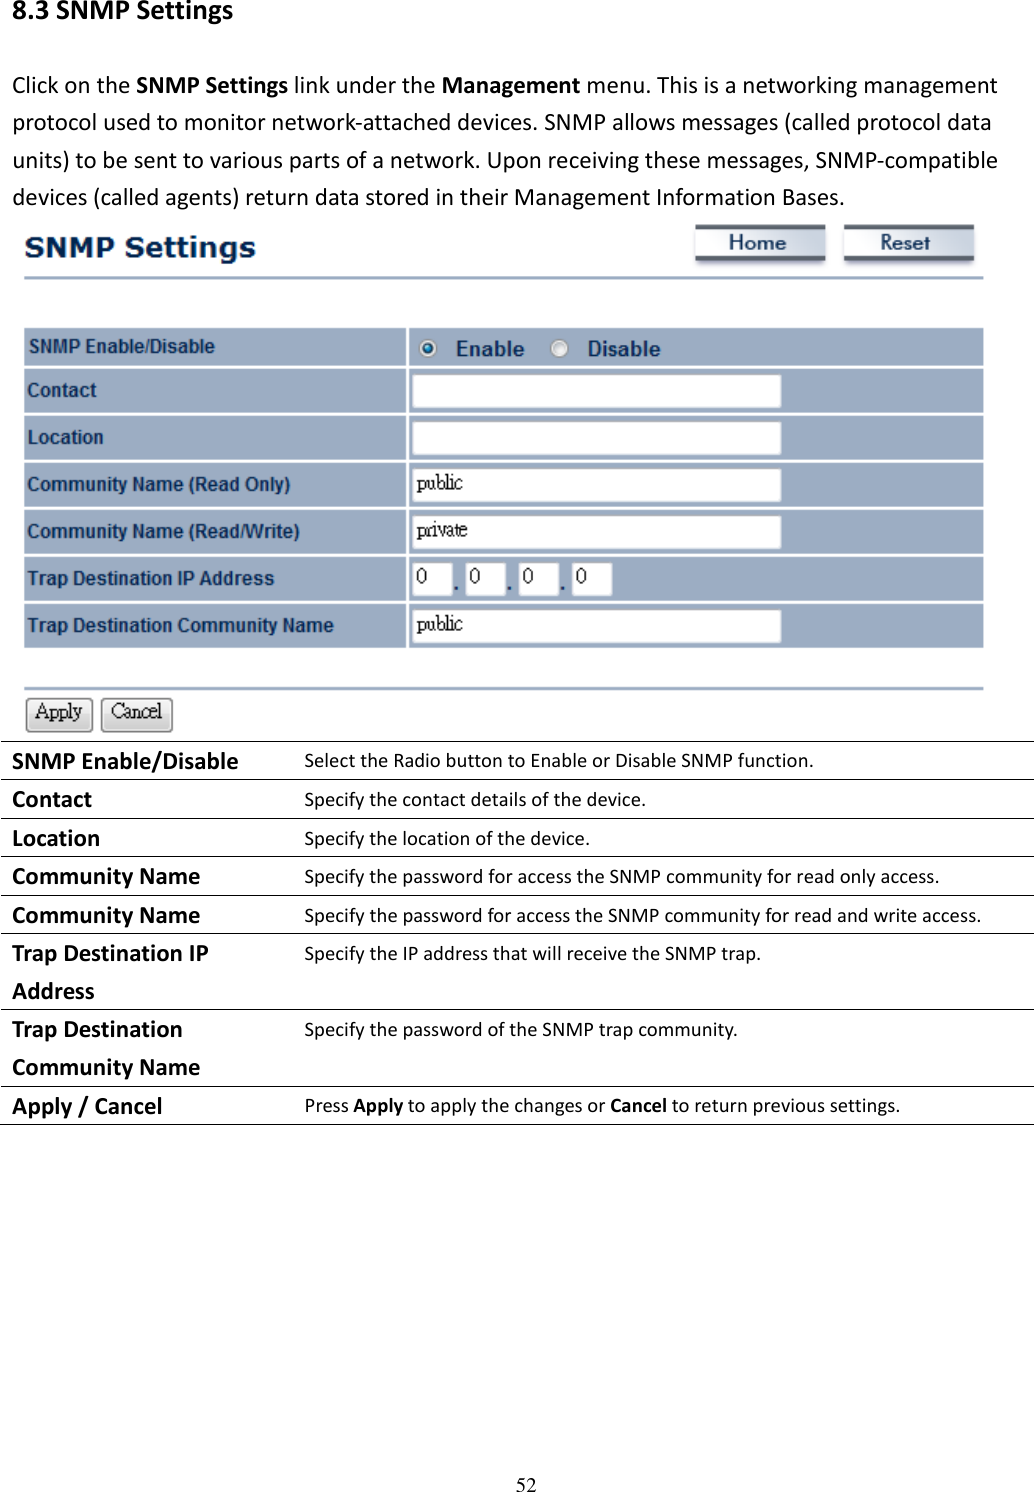   528.3 SNMP Settings Click on the SNMP Settings link under the Management menu. This is a networking management protocol used to monitor network-attached devices. SNMP allows messages (called protocol data units) to be sent to various parts of a network. Upon receiving these messages, SNMP-compatible devices (called agents) return data stored in their Management Information Bases.  SNMP Enable/Disable Select the Radio button to Enable or Disable SNMP function. Contact Specify the contact details of the device. Location Specify the location of the device. Community Name Specify the password for access the SNMP community for read only access. Community Name Specify the password for access the SNMP community for read and write access. Trap Destination IP Address Specify the IP address that will receive the SNMP trap. Trap Destination Community Name Specify the password of the SNMP trap community. Apply / Cancel Press Apply to apply the changes or Cancel to return previous settings.        